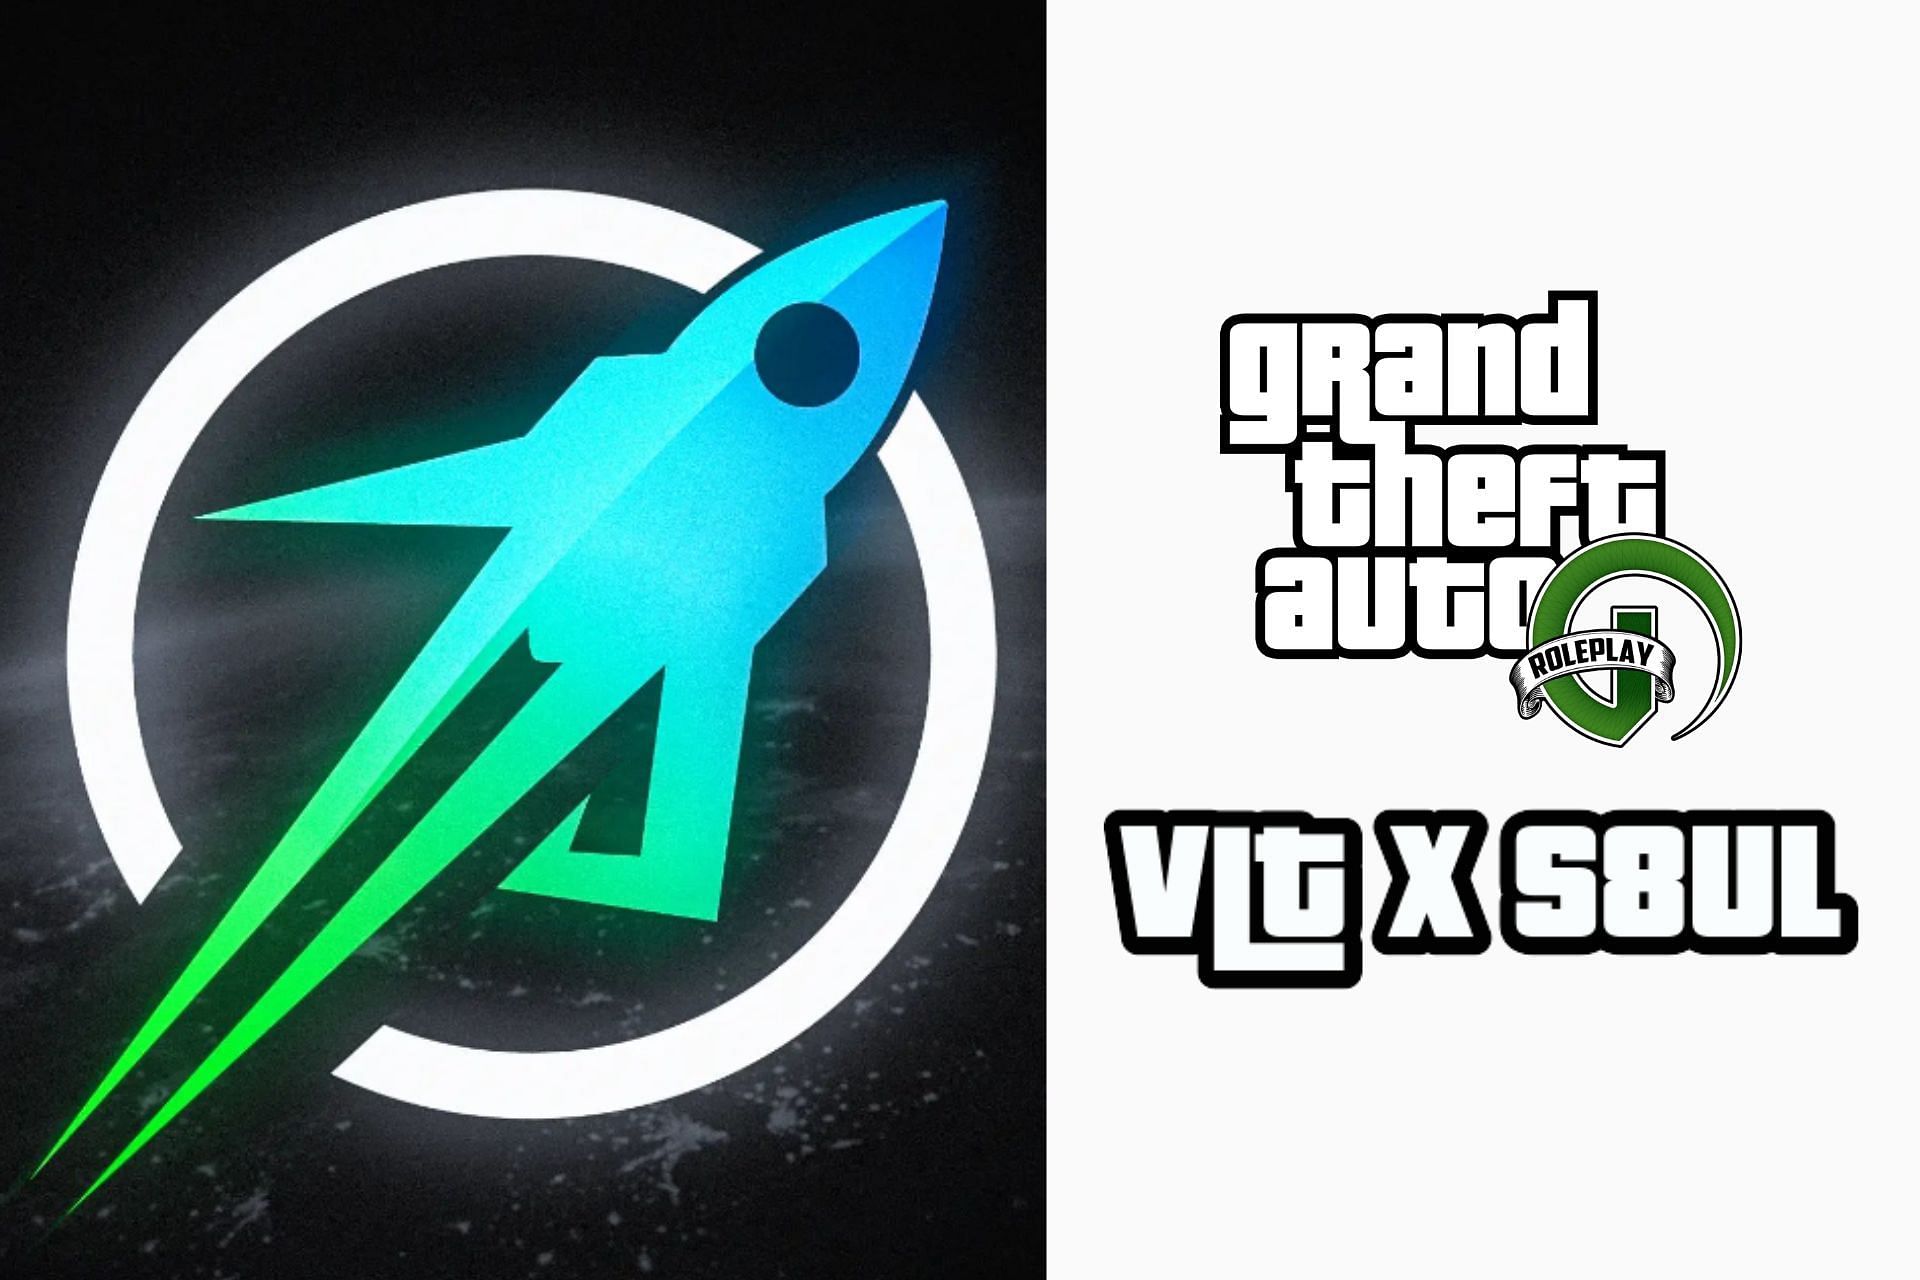 Popular Indian gamers group together to improve the GTA 5 RP experience (Image via Sportskeeda)